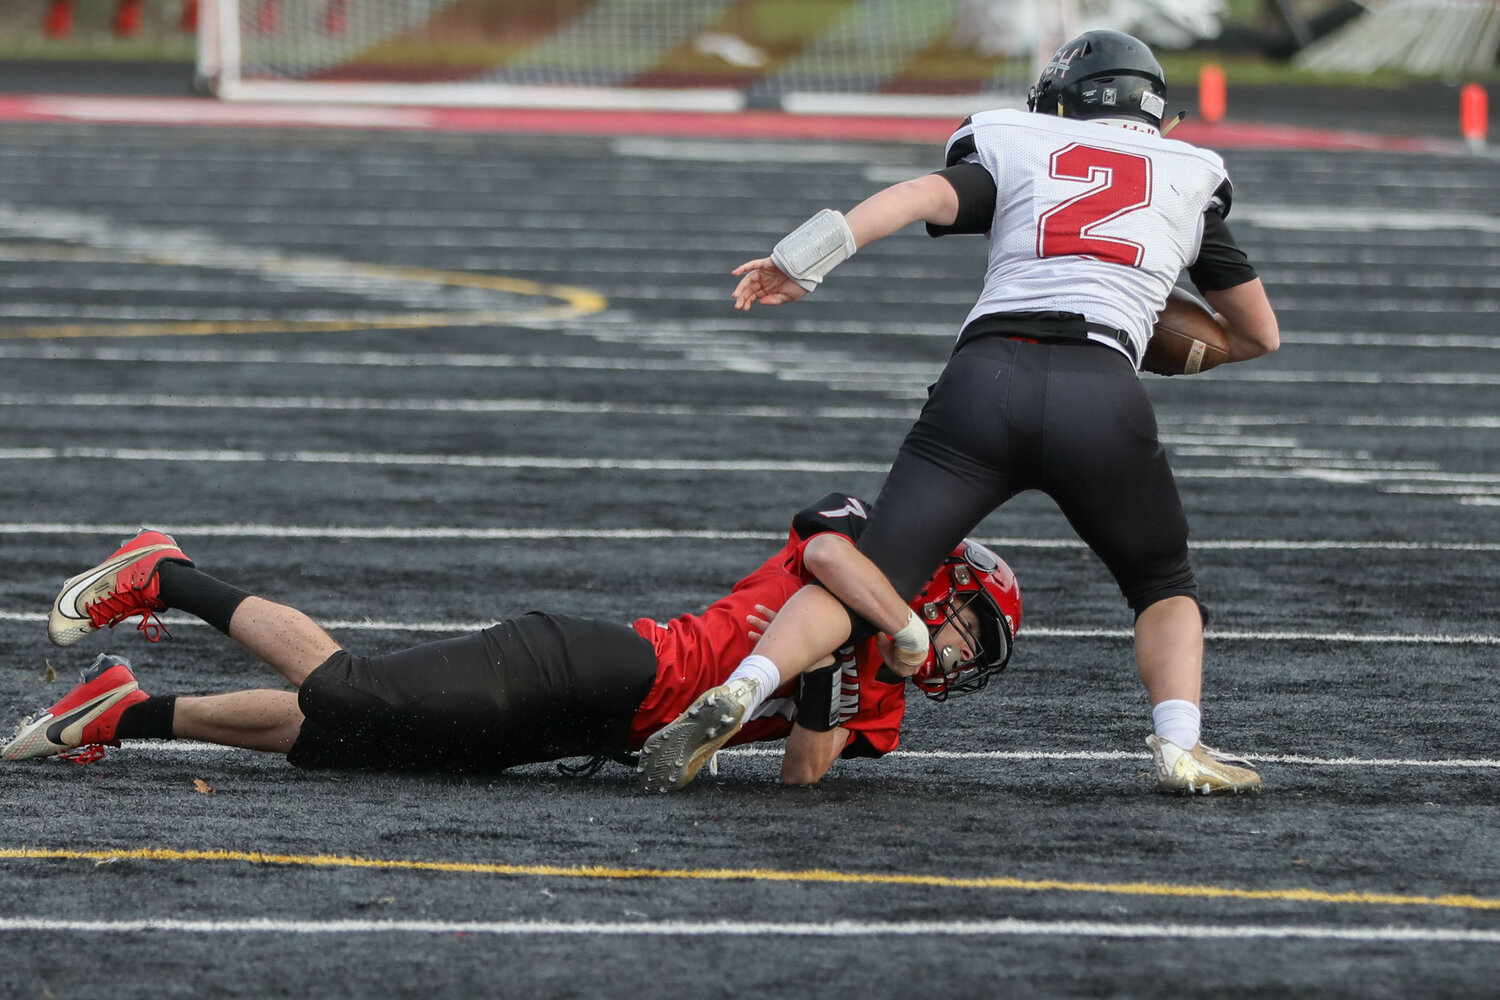 Peyton McClure wraps up a ballcarrier during Mossyrock's 46-30 win over Almira-Coulee-Hartline in the 1B state quarterfinals, Nov. 18 in Tenino.